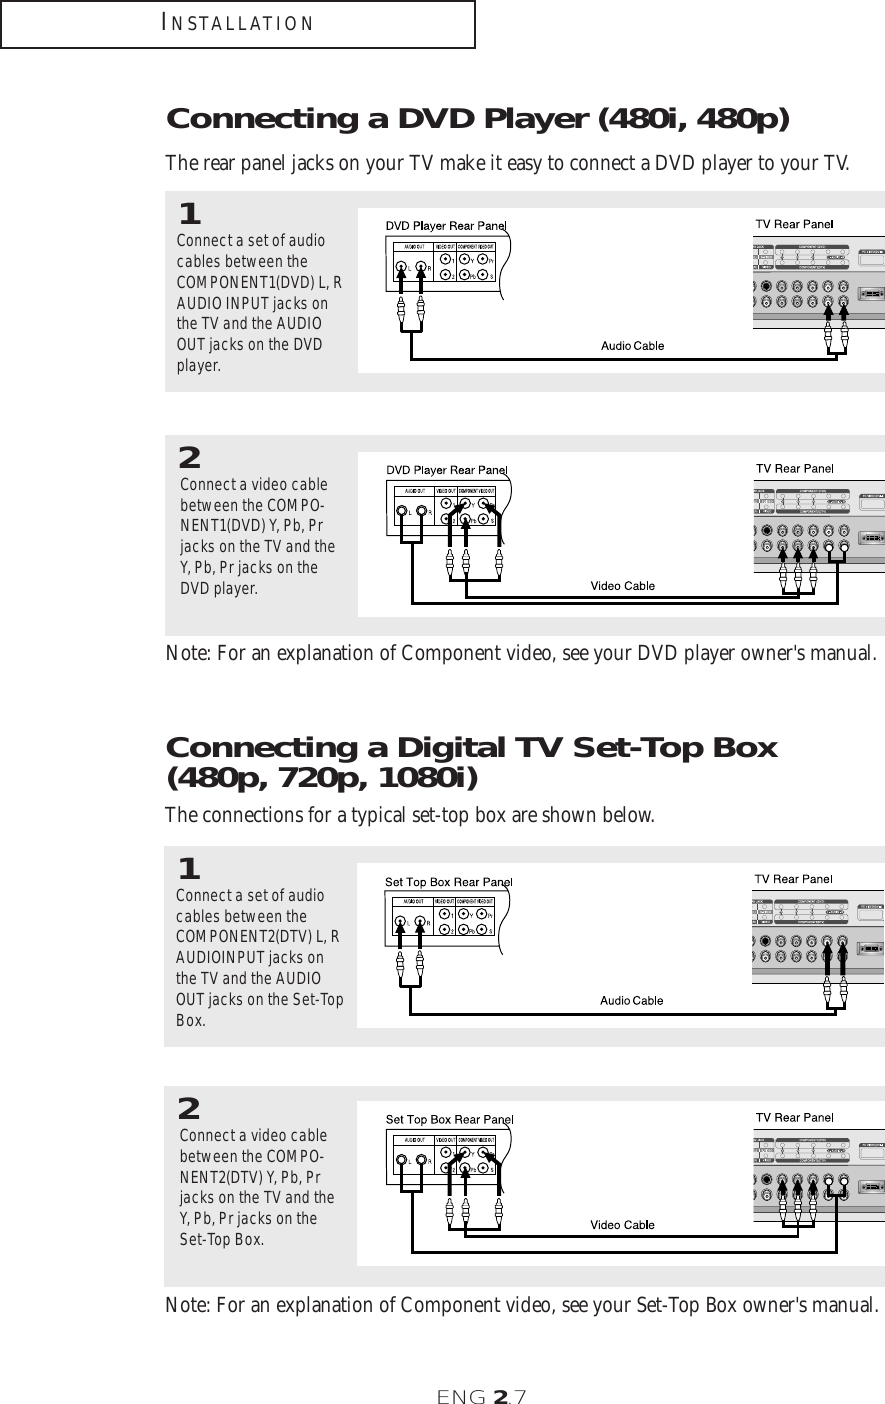 ENG 2.7INSTALLATIONNote: For an explanation of Component video, see your DVD player owner&apos;s manual.  Connecting a DVD Player (480i, 480p)The rear panel jacks on your TV make it easy to connect a DVD player to your TV.1Connect a set of audiocables between theCOMPONENT1(DVD) L, RAUDIO INPUT jacks onthe TV and the AUDIOOUT jacks on the DVDplayer.2Connect a video cablebetween the COMPO-NENT1(DVD) Y, Pb, Prjacks on the TV and theY, Pb, Pr jacks on theDVD player. Note: For an explanation of Component video, see your Set-Top Box owner&apos;s manual.  Connecting a Digital TV Set-Top Box (480p, 720p, 1080i)The connections for a typical set-top box are shown below.1Connect a set of audiocables between theCOMPONENT2(DTV) L, RAUDIOINPUT jacks onthe TV and the AUDIOOUT jacks on the Set-TopBox.2Connect a video cablebetween the COMPO-NENT2(DTV) Y, Pb, Prjacks on the TV and theY, Pb, Pr jacks on theSet-Top Box. 